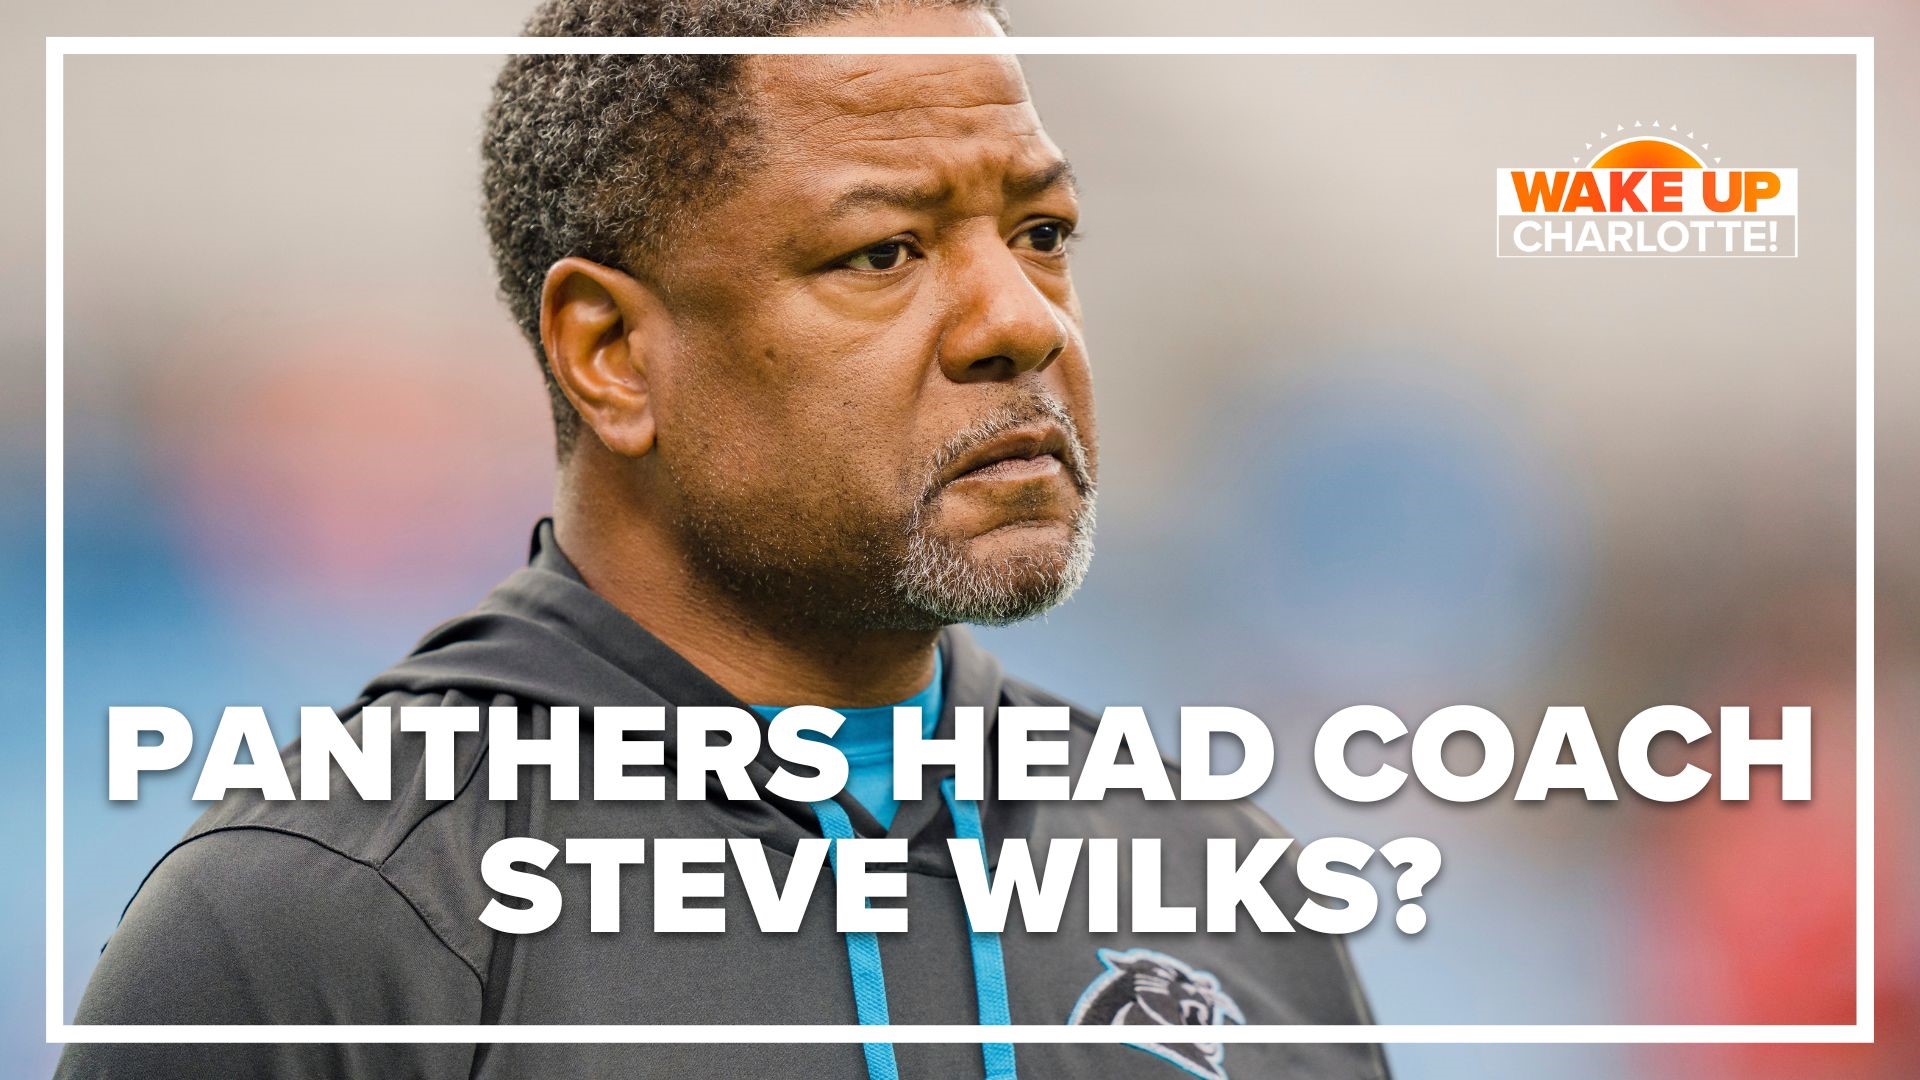 Steve Wilks wrapped up his run as interim coach with a 6-6 record. Has he done enough to be the Panthers' full-time coach?